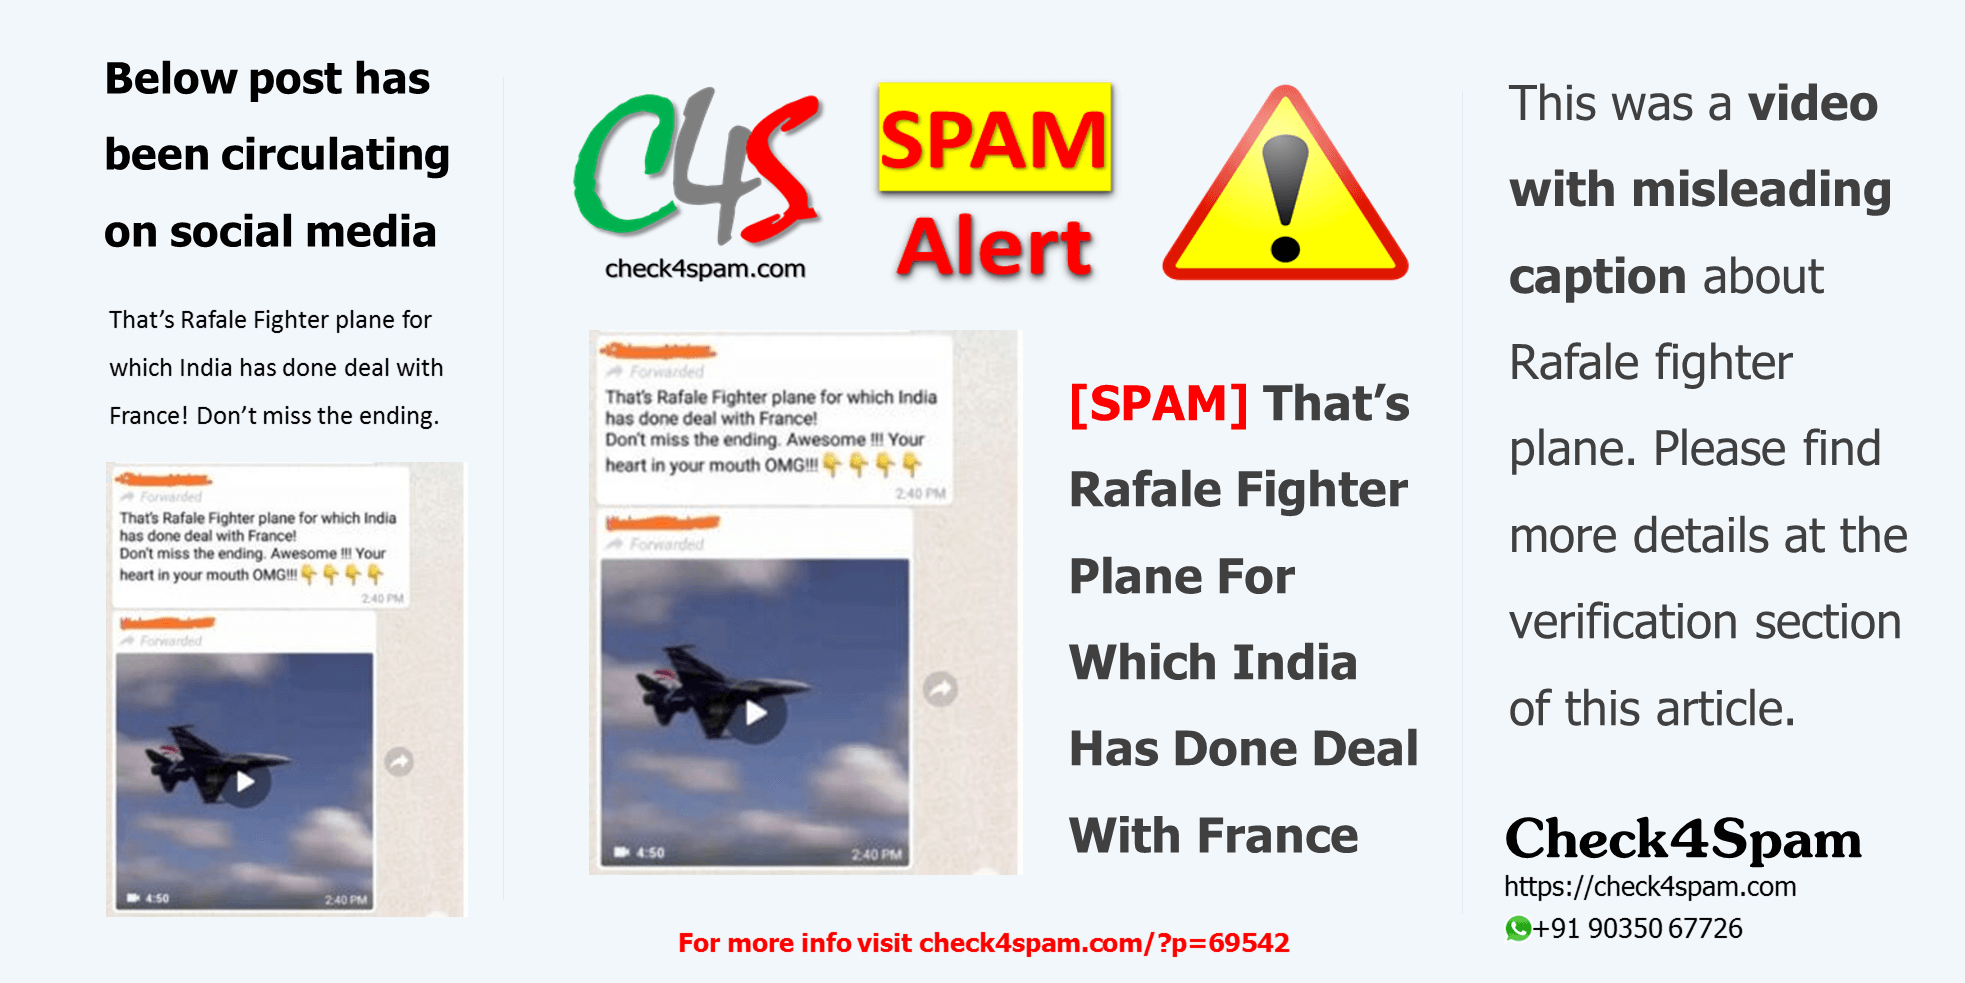 [SPAM] That’s Rafale Fighter Plane For Which India Has Done Deal With France